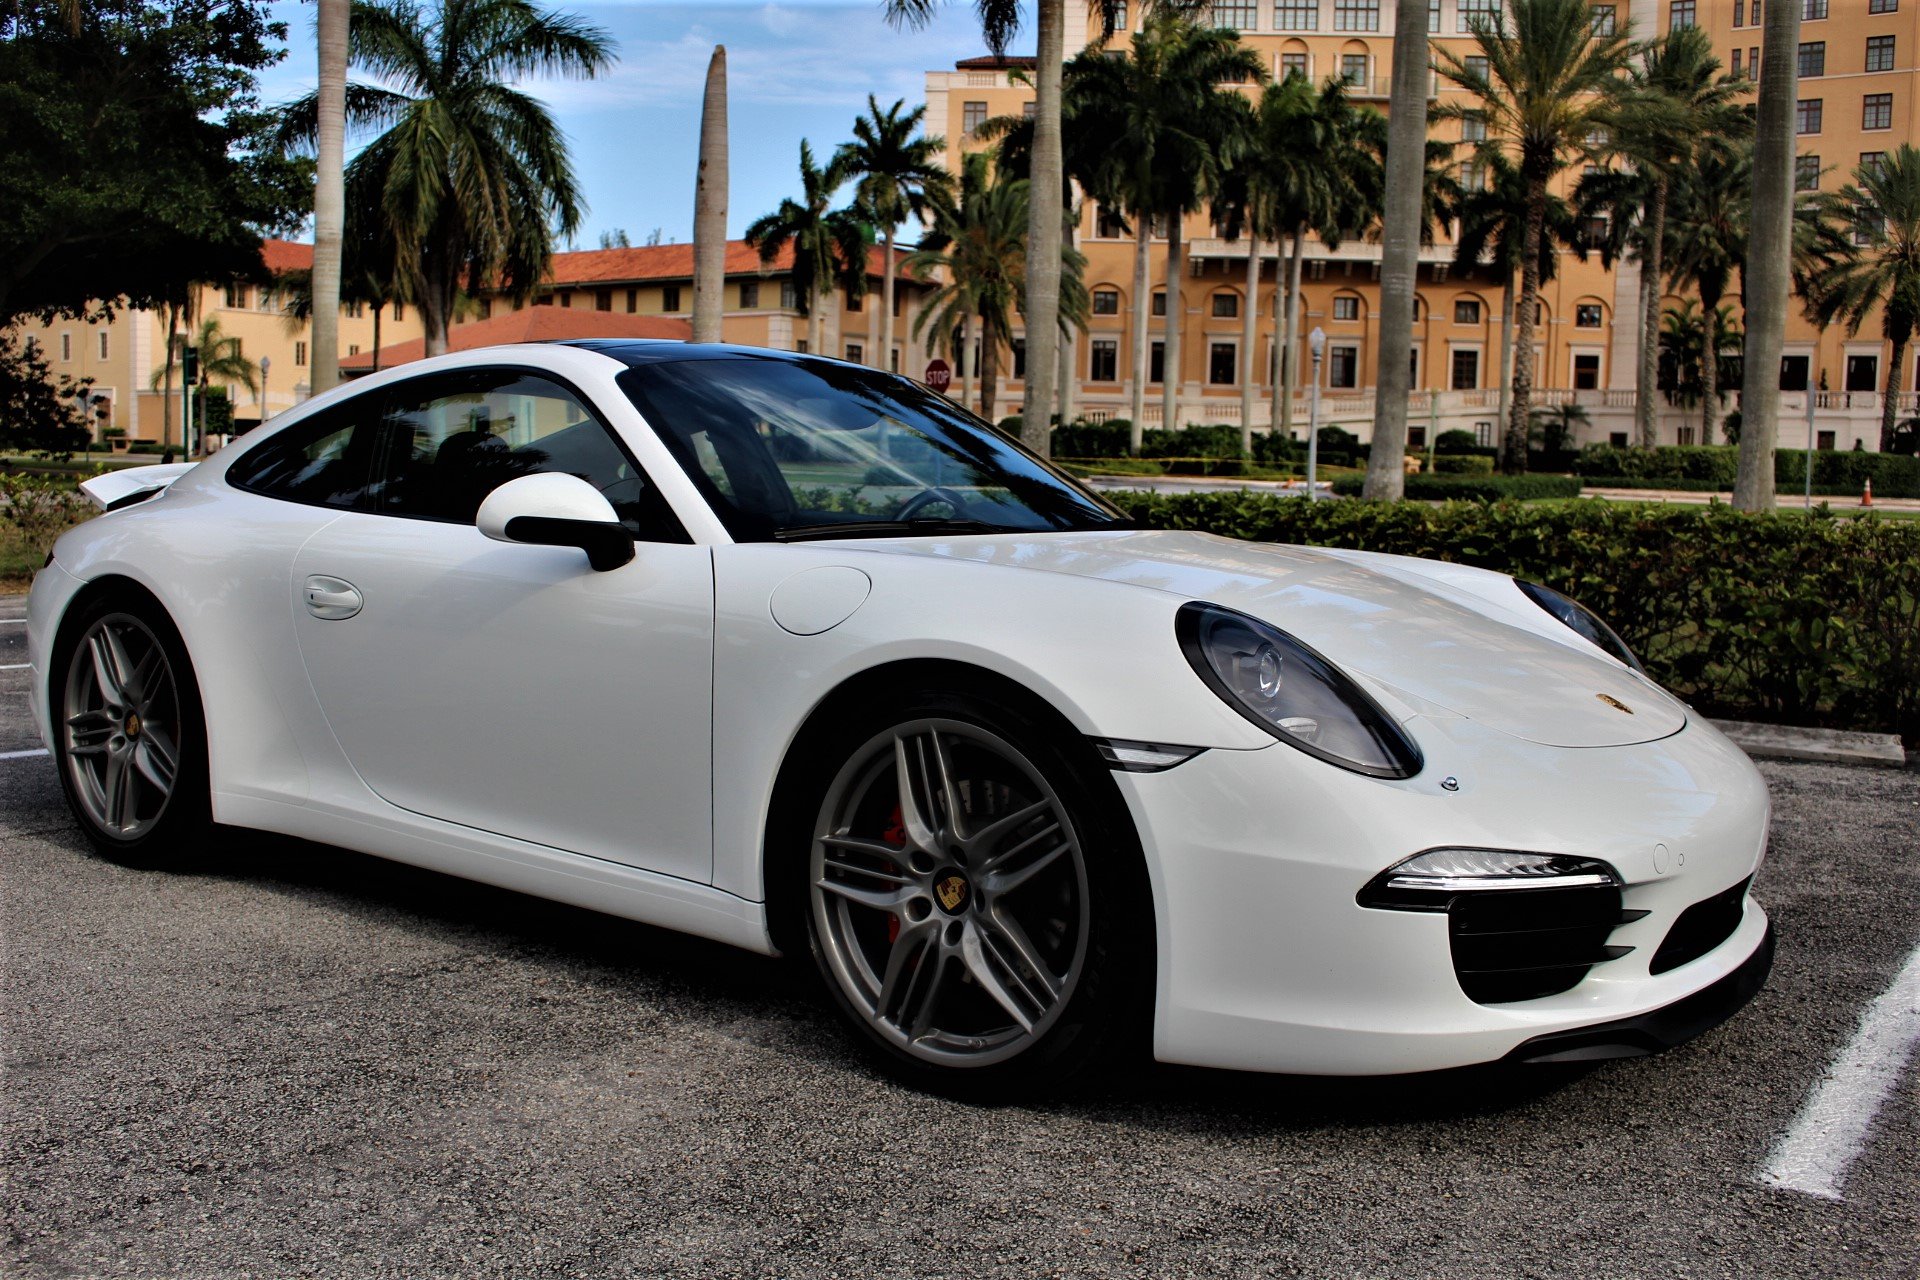 Used 2014 Porsche 911 Carrera S for sale Sold at The Gables Sports Cars in Miami FL 33146 3